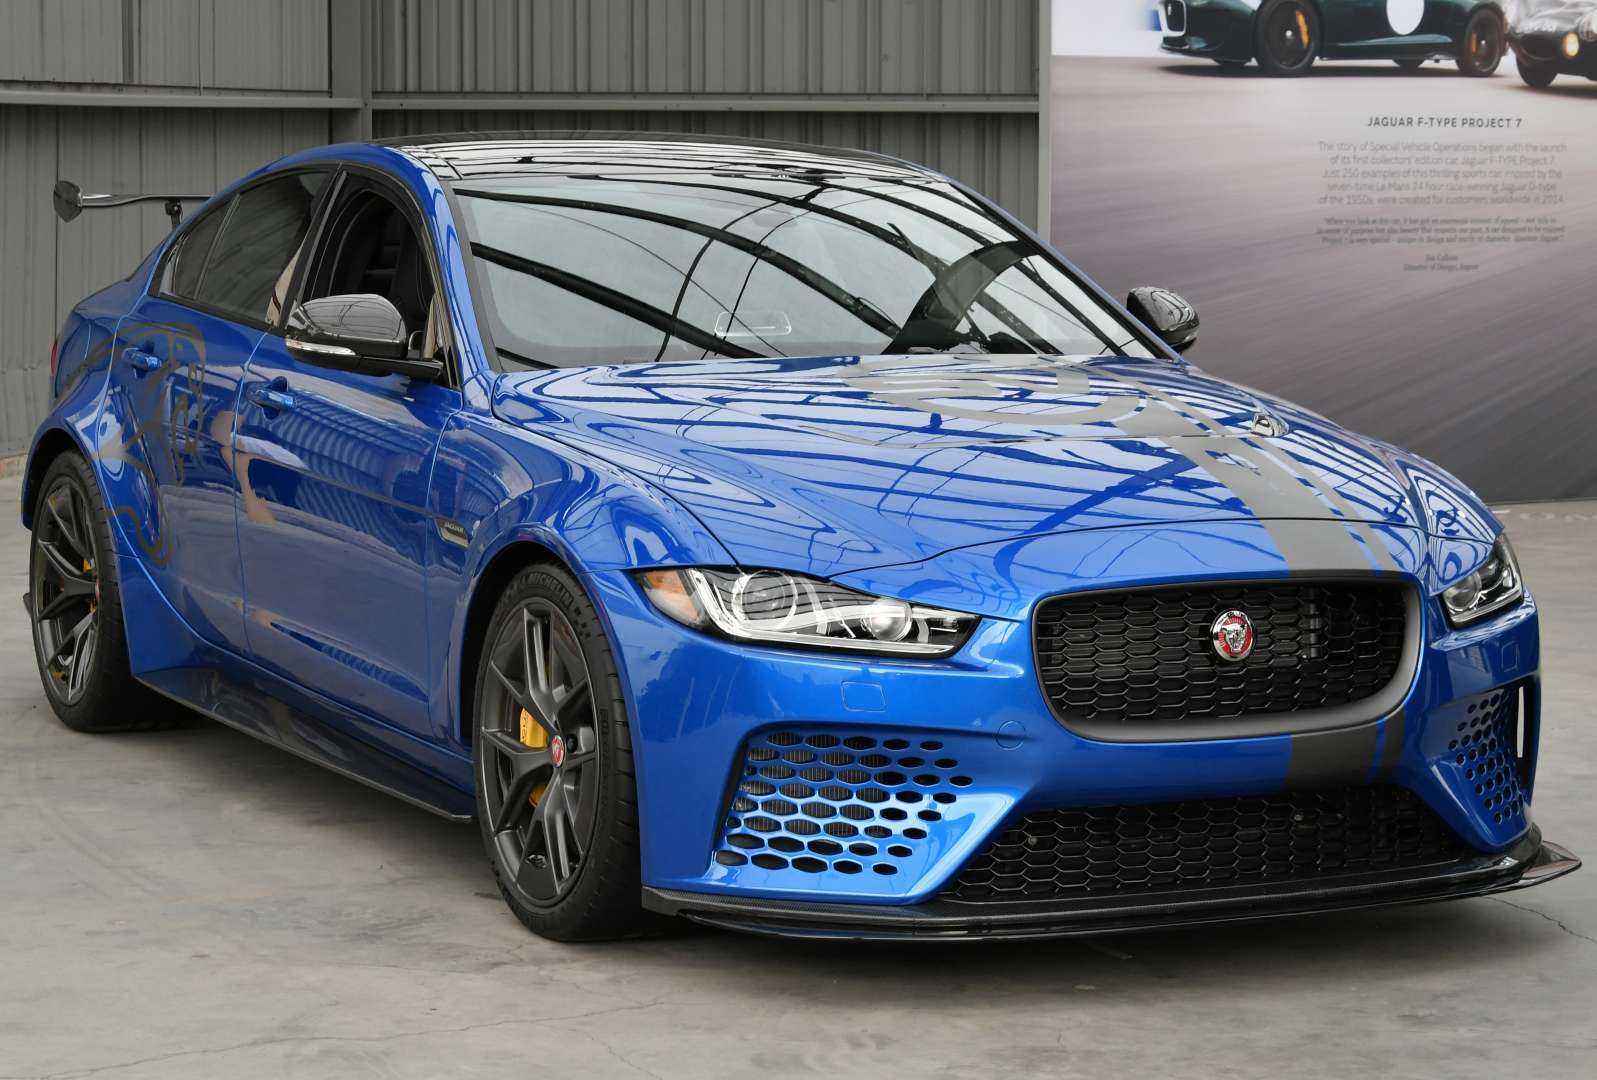 The 2019 Jaguar XE SV Project 8 is a compact luxury car that behaves like a rally car - dlmag